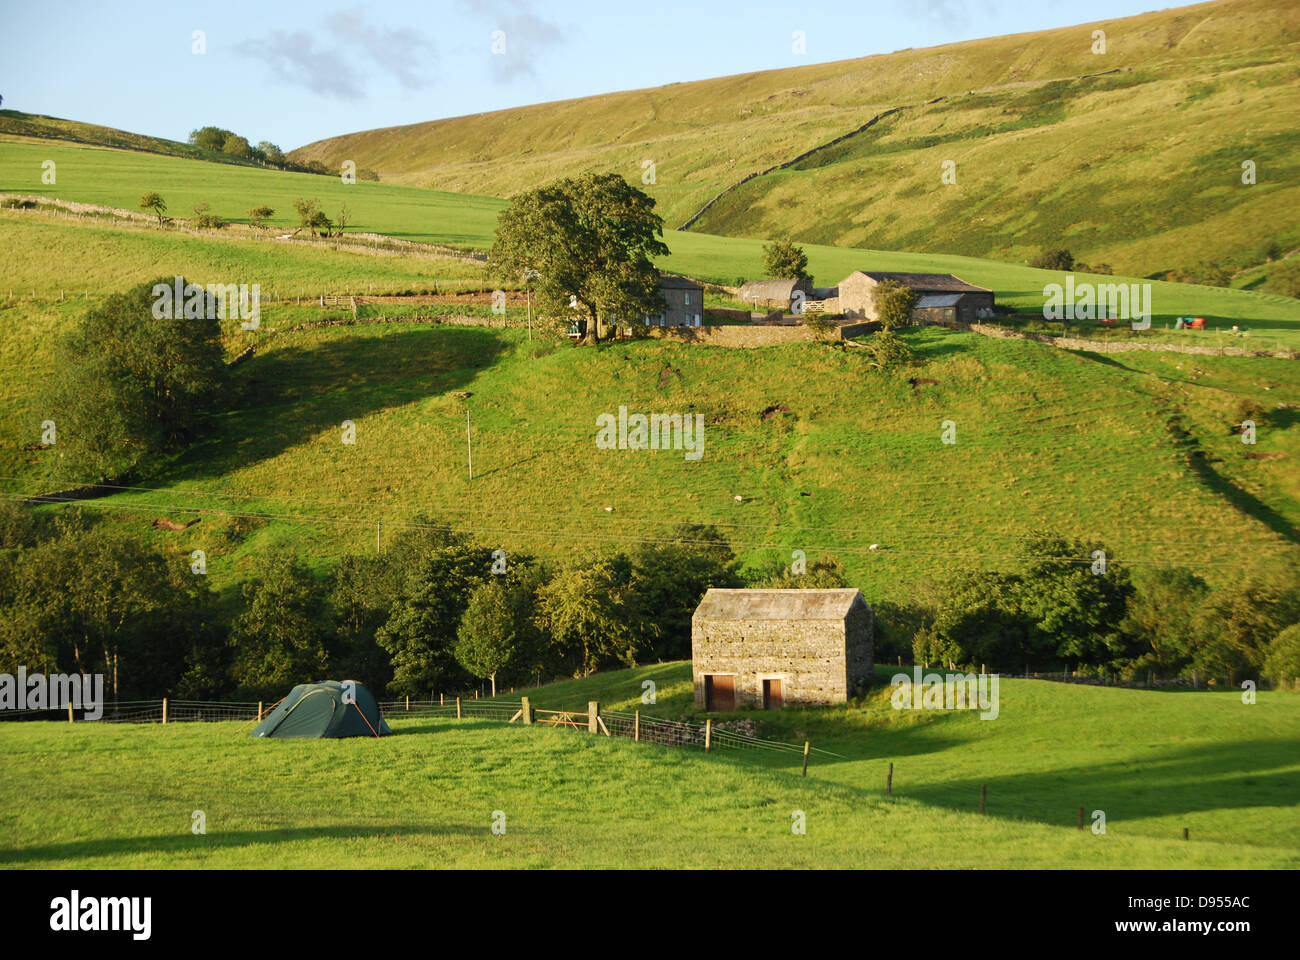 A tent and Barns in The Yorkshire dales.  UK Stock Photo